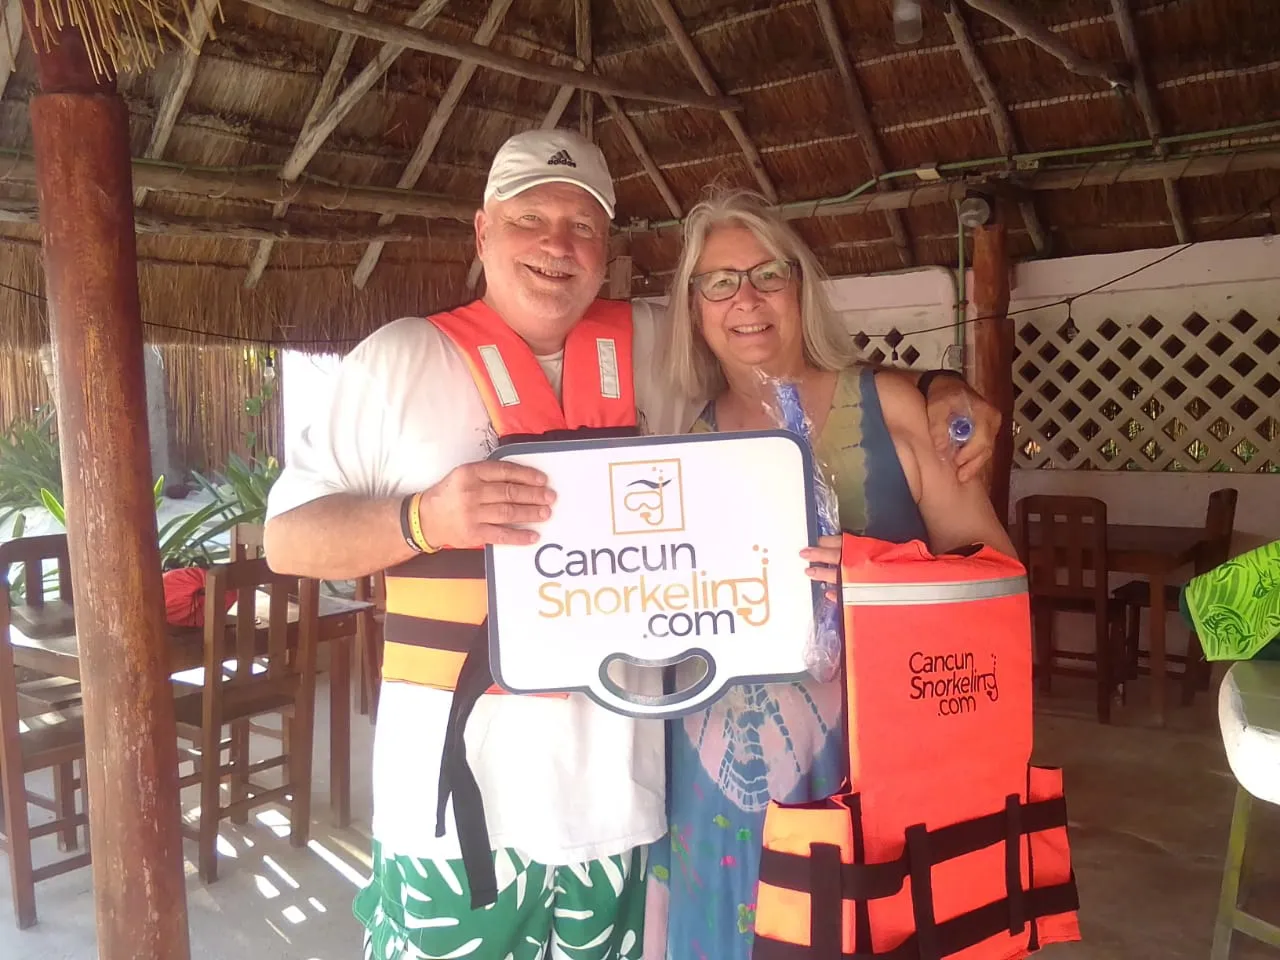 Adult couple at palapa roofed restaurant wearing life jackets and holding a sign with Cancun Snorkeling logo